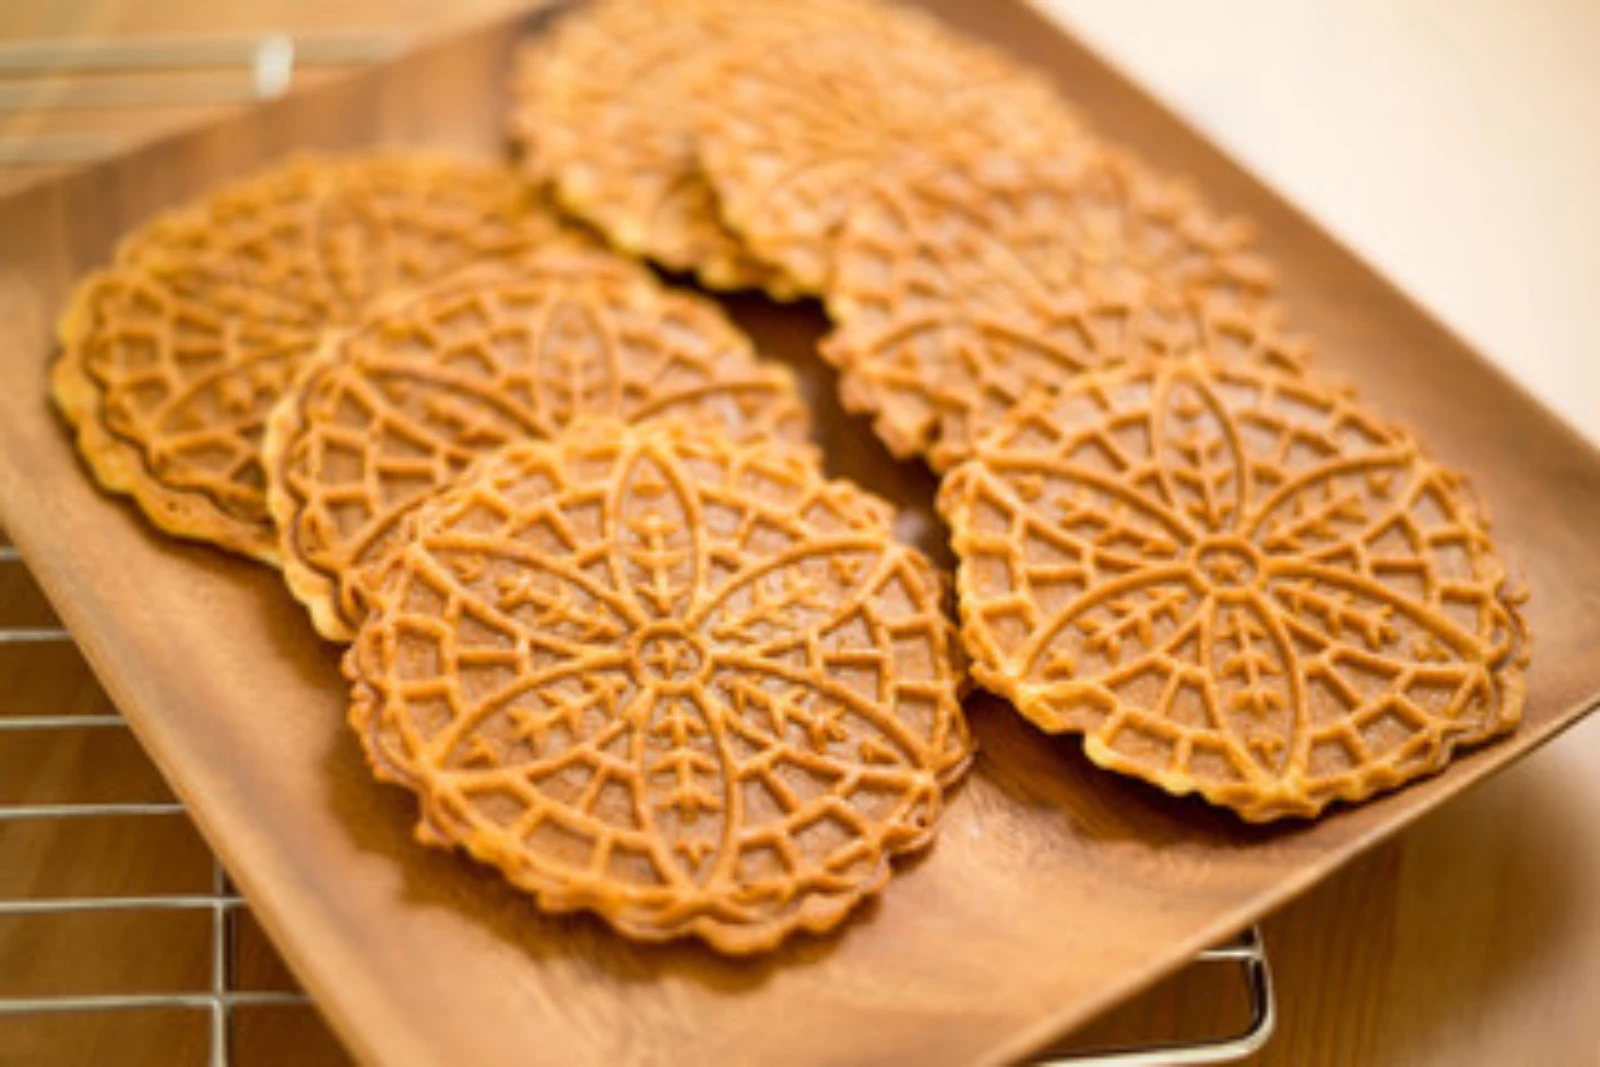 The Pizzelle Triangle